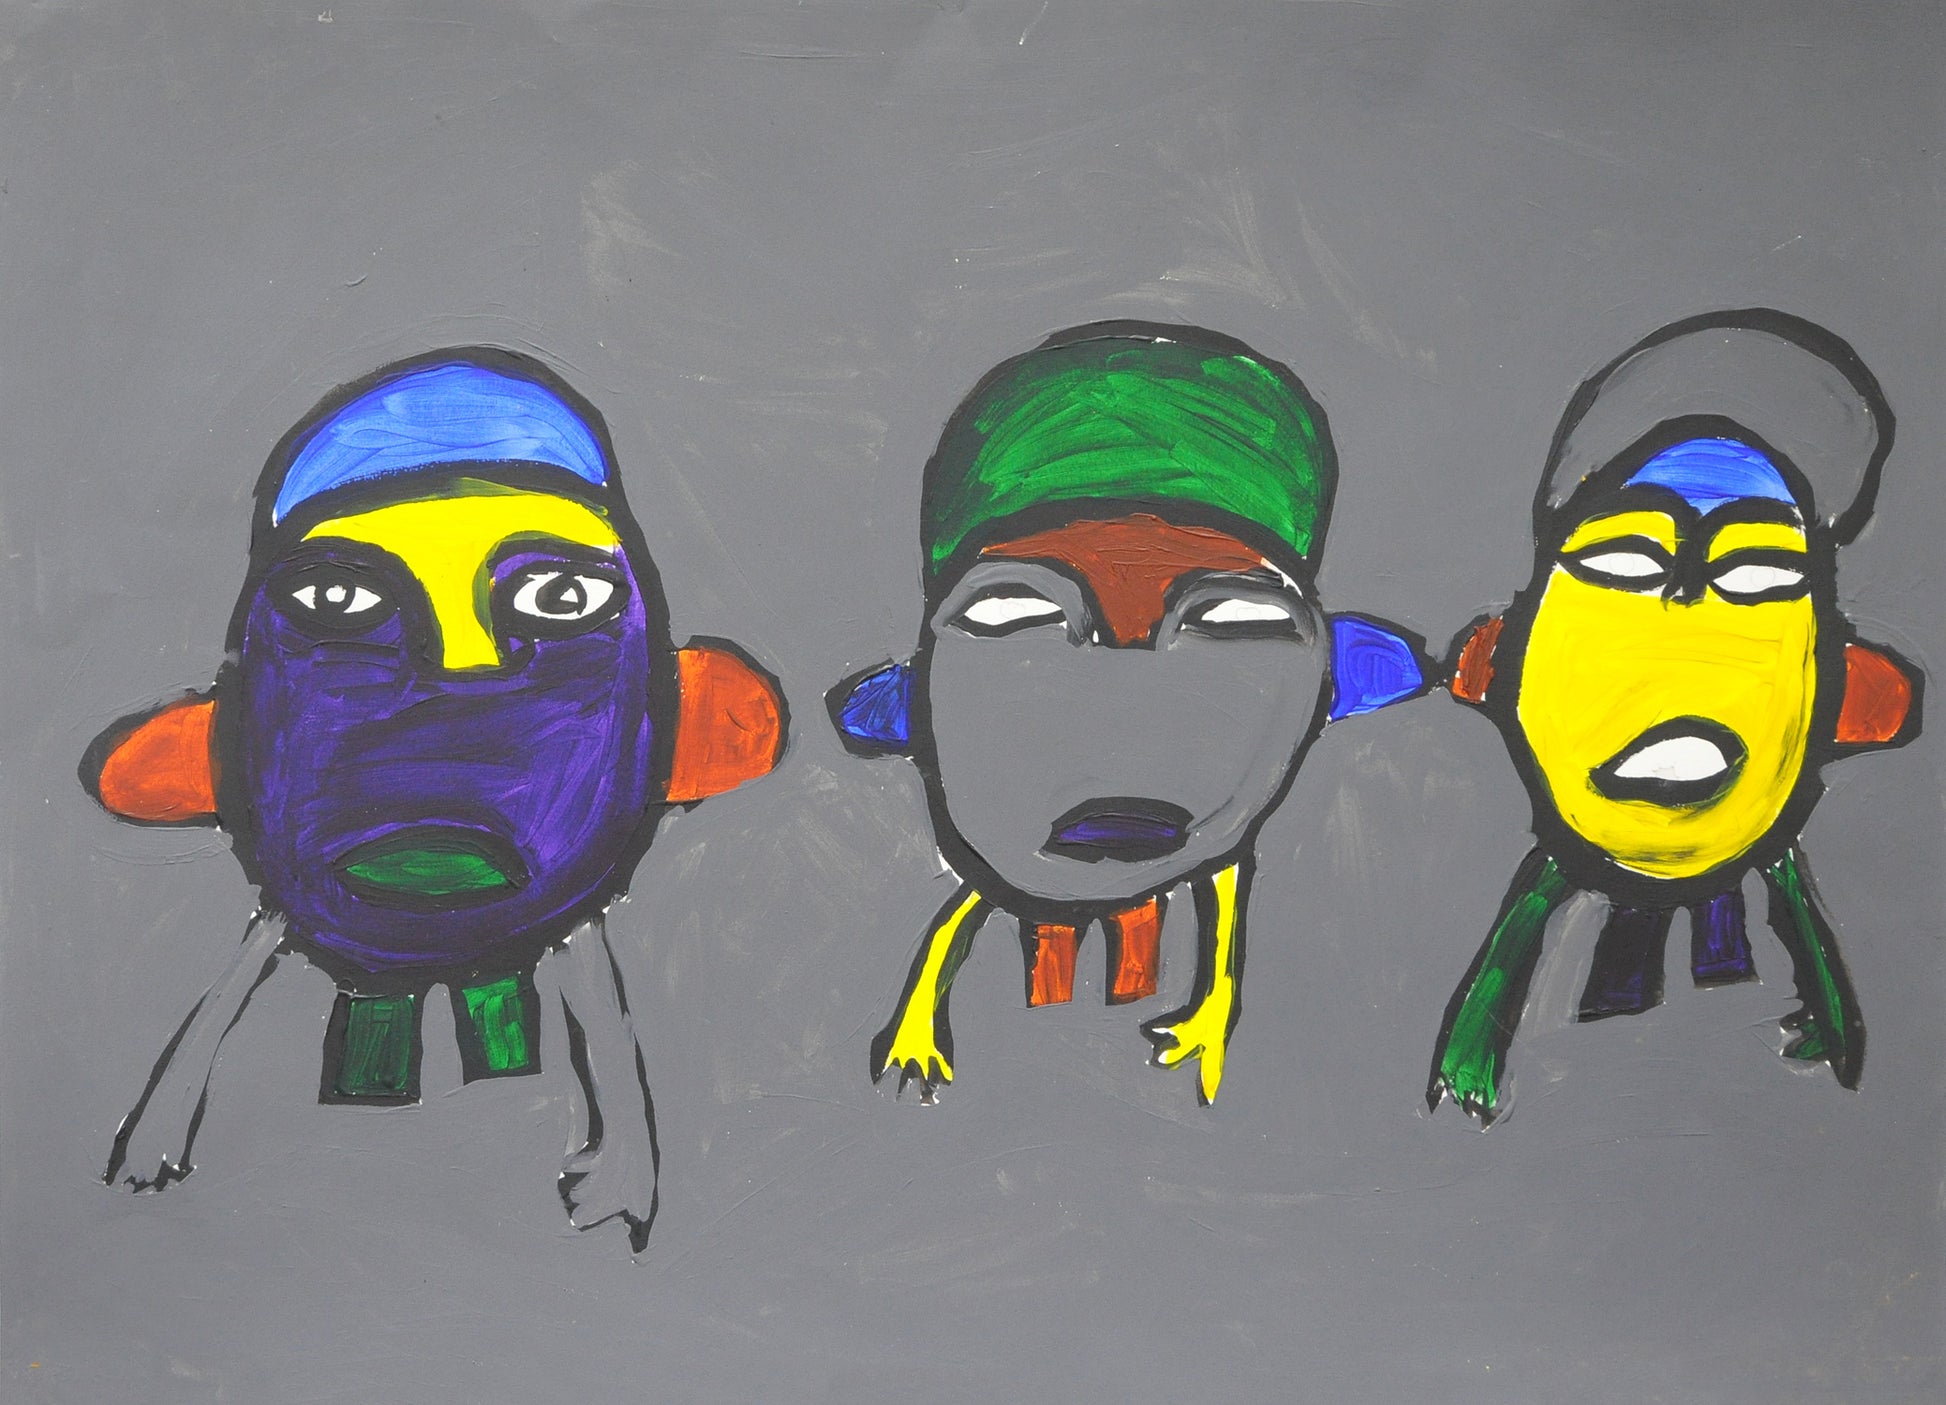 Three figures on a gray background with large ovular faces, elongated arts, short stubby legs without feet. The figure on the left has a dark purple face, intently staring eyes, prominent orange ears, a green mouth, green legs, yellow nose and a bright blue baseball cap-like object on their head. The other two figures are similarly shaped and colored in different combinations, but lack pupils in their eyes.